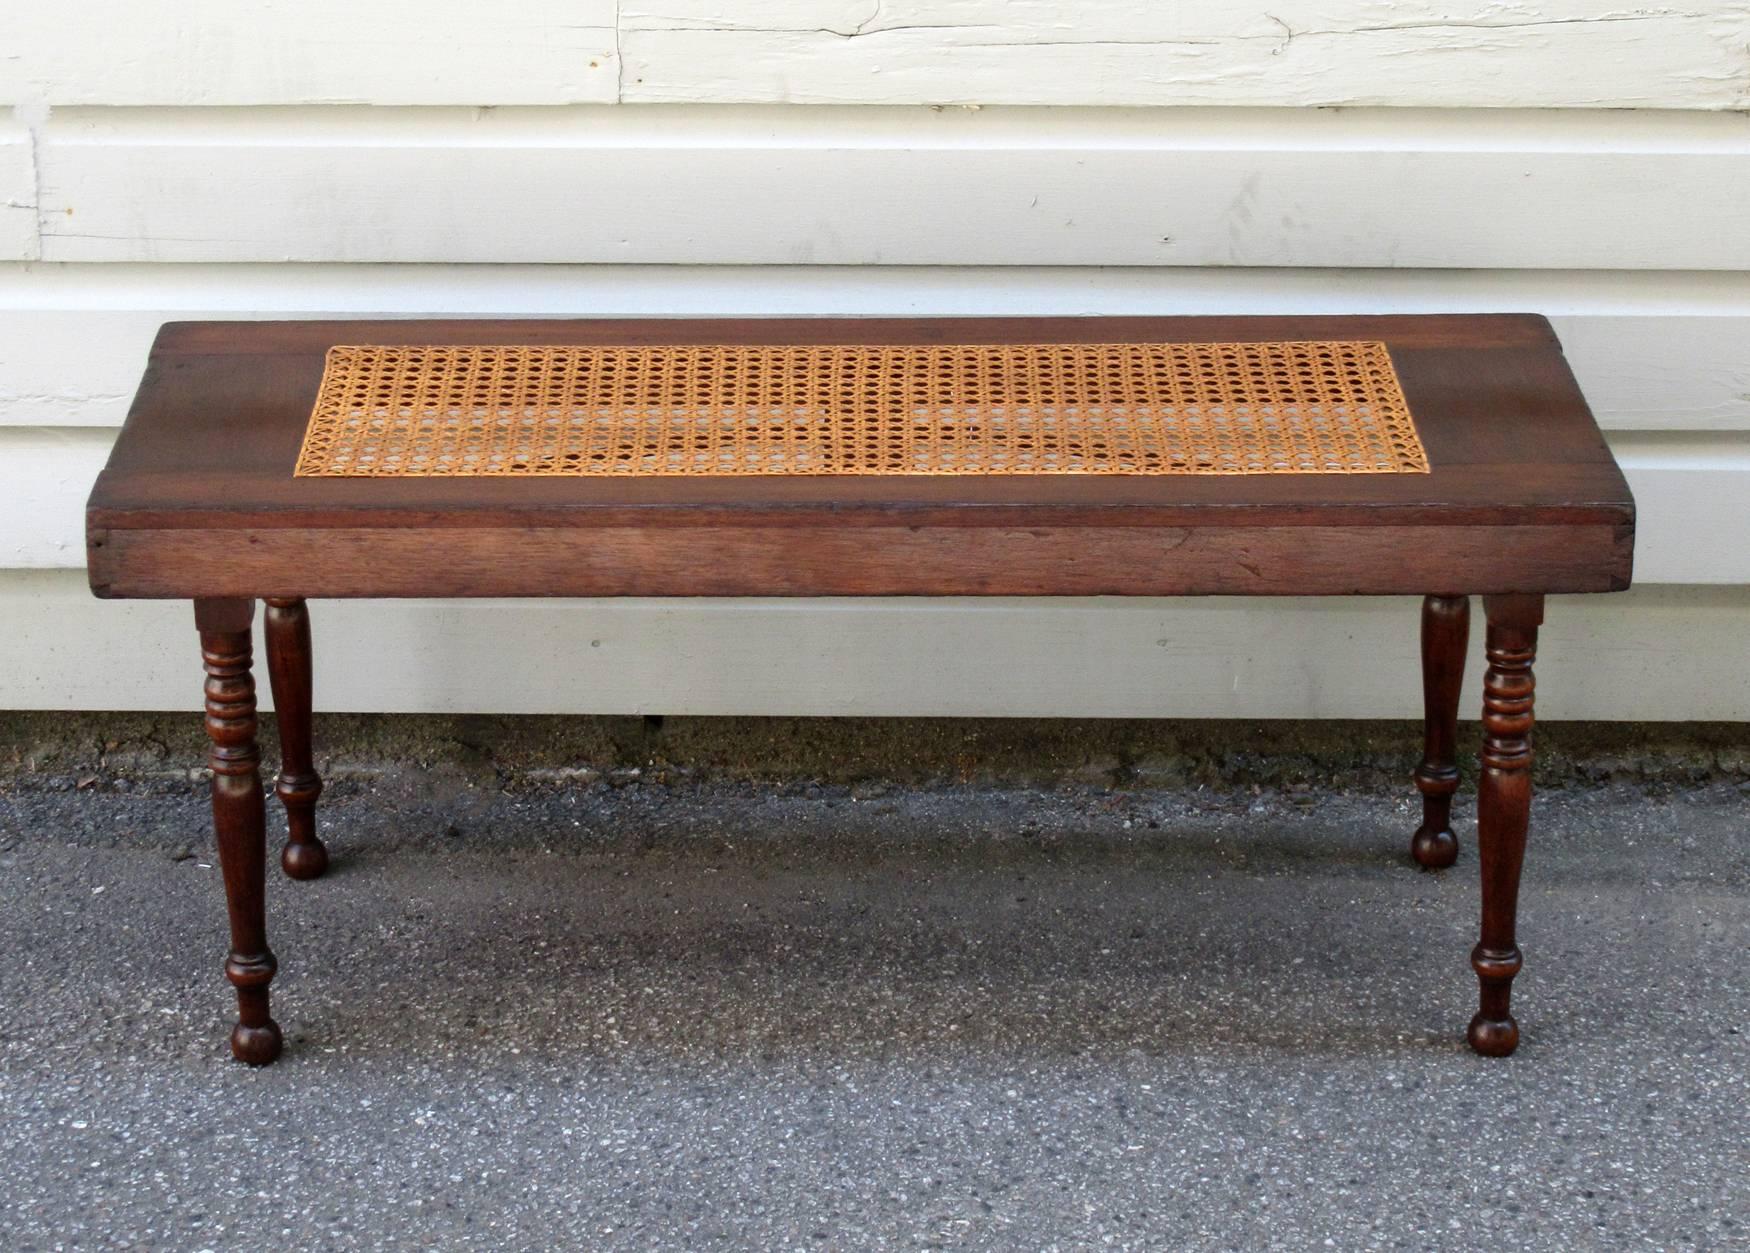 An early 19th century Caribbean Campaign mahogany and hand-caned bench from Jamaica, circa 1820, featuring finely turned legs and iron stretchers. The legs collapse and fold down into the frame. The caning is new but was hand-done recently by a